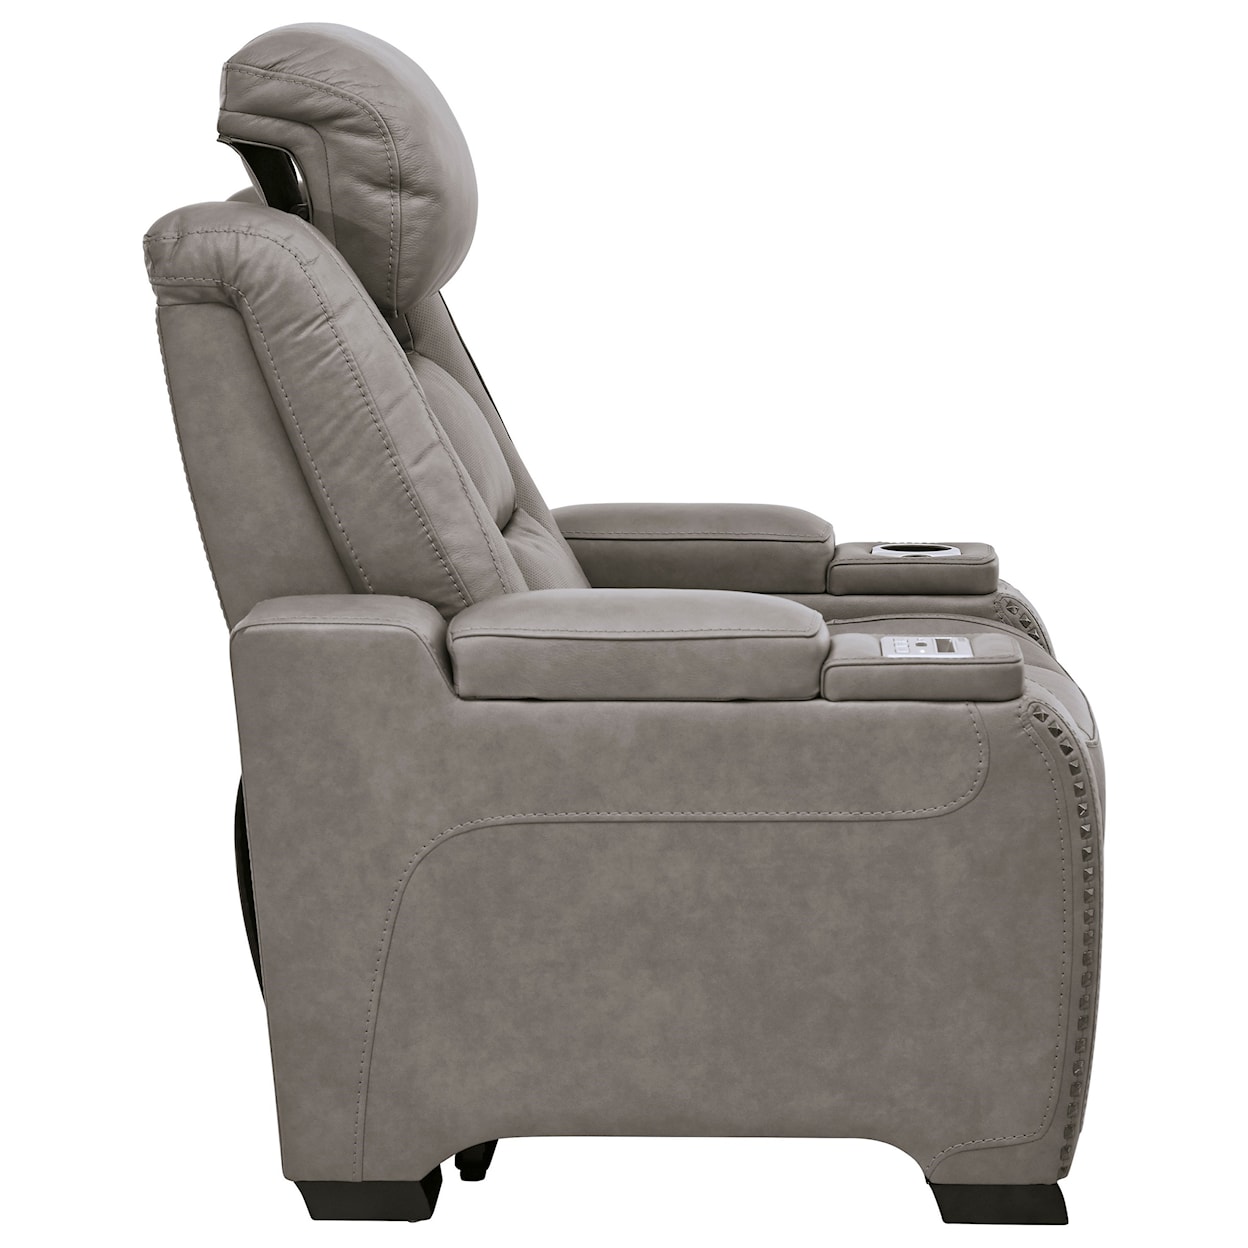 Signature Design by Ashley The Man-Den Power Recliner with Adjustable Headrest